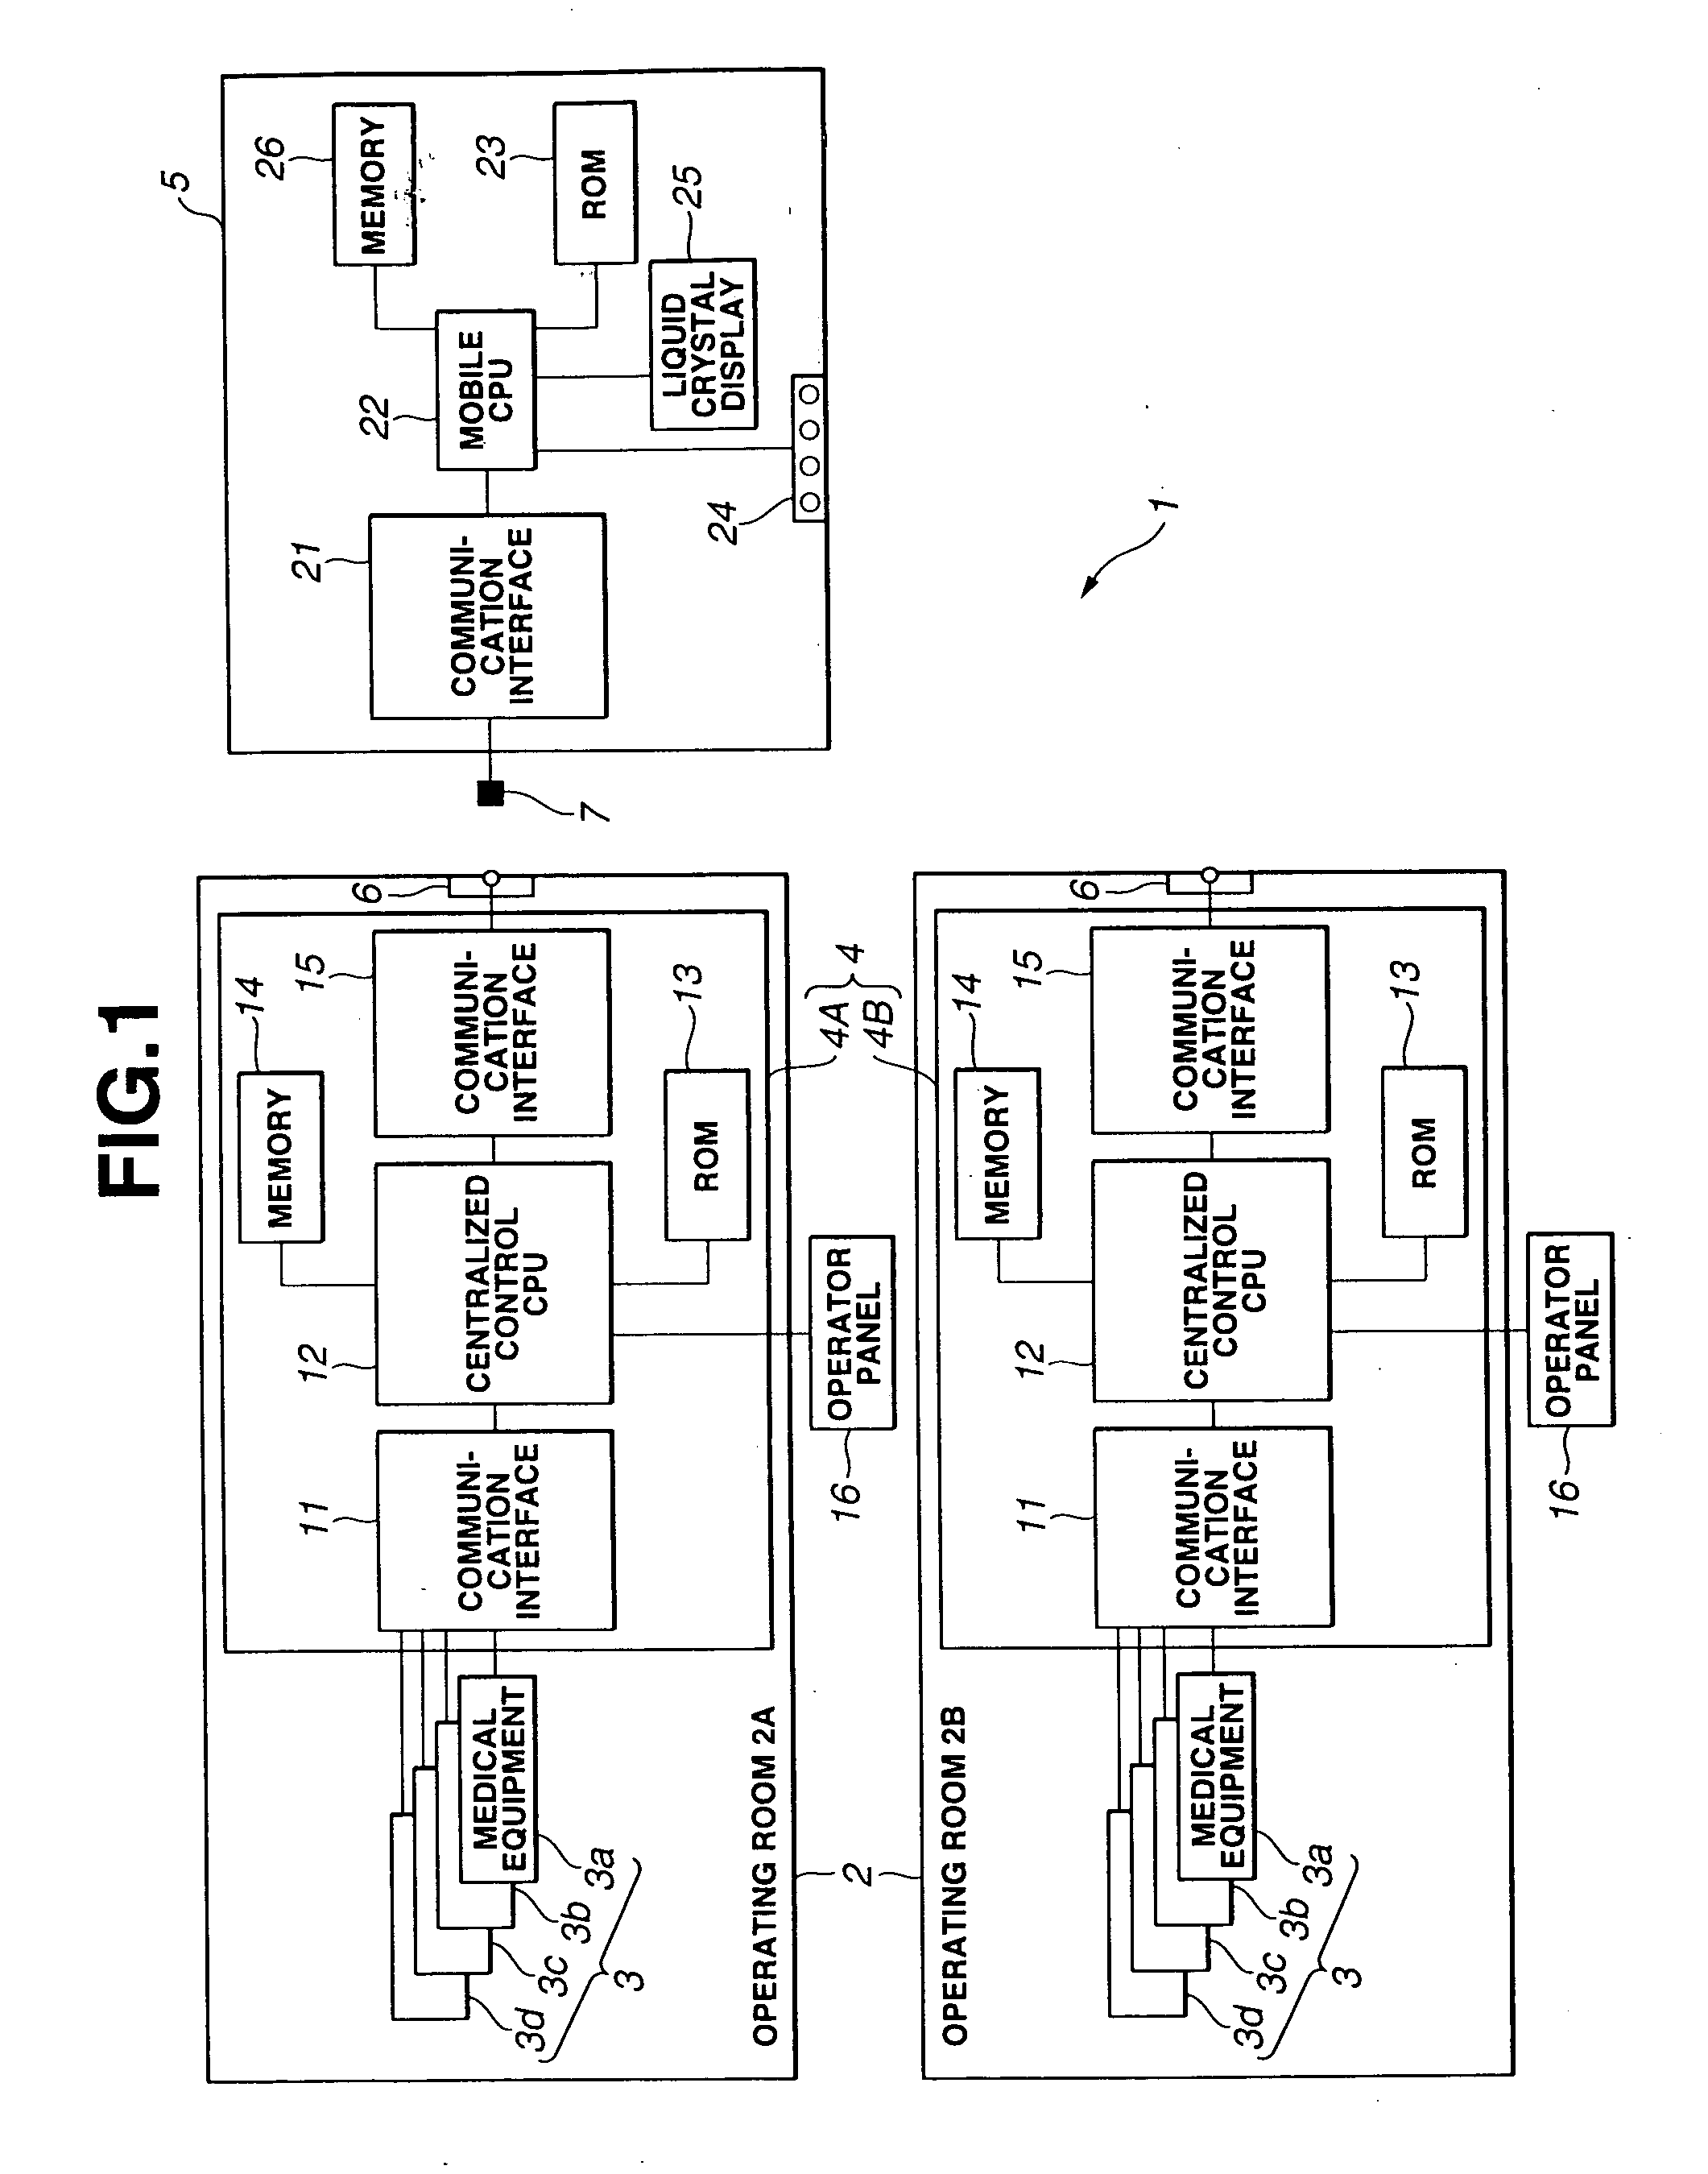 Control system for controlling medical equipment